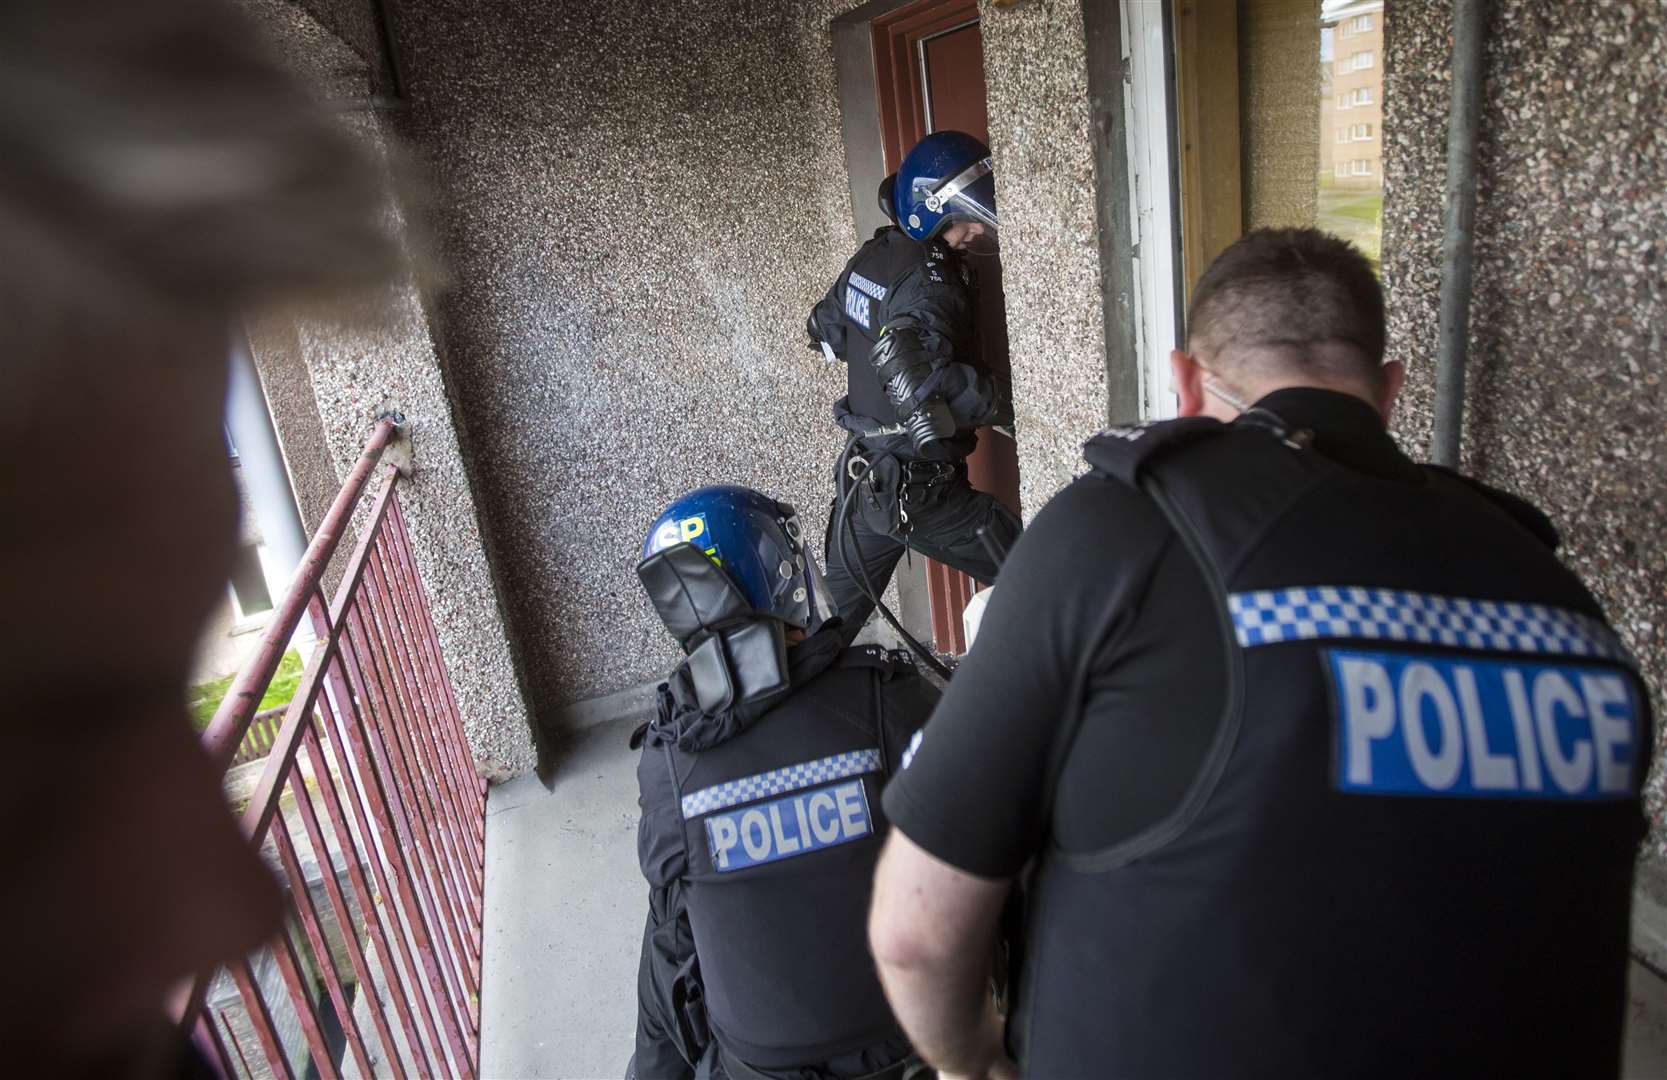 Police have carried out raids on properties of suspected drug dealers before.